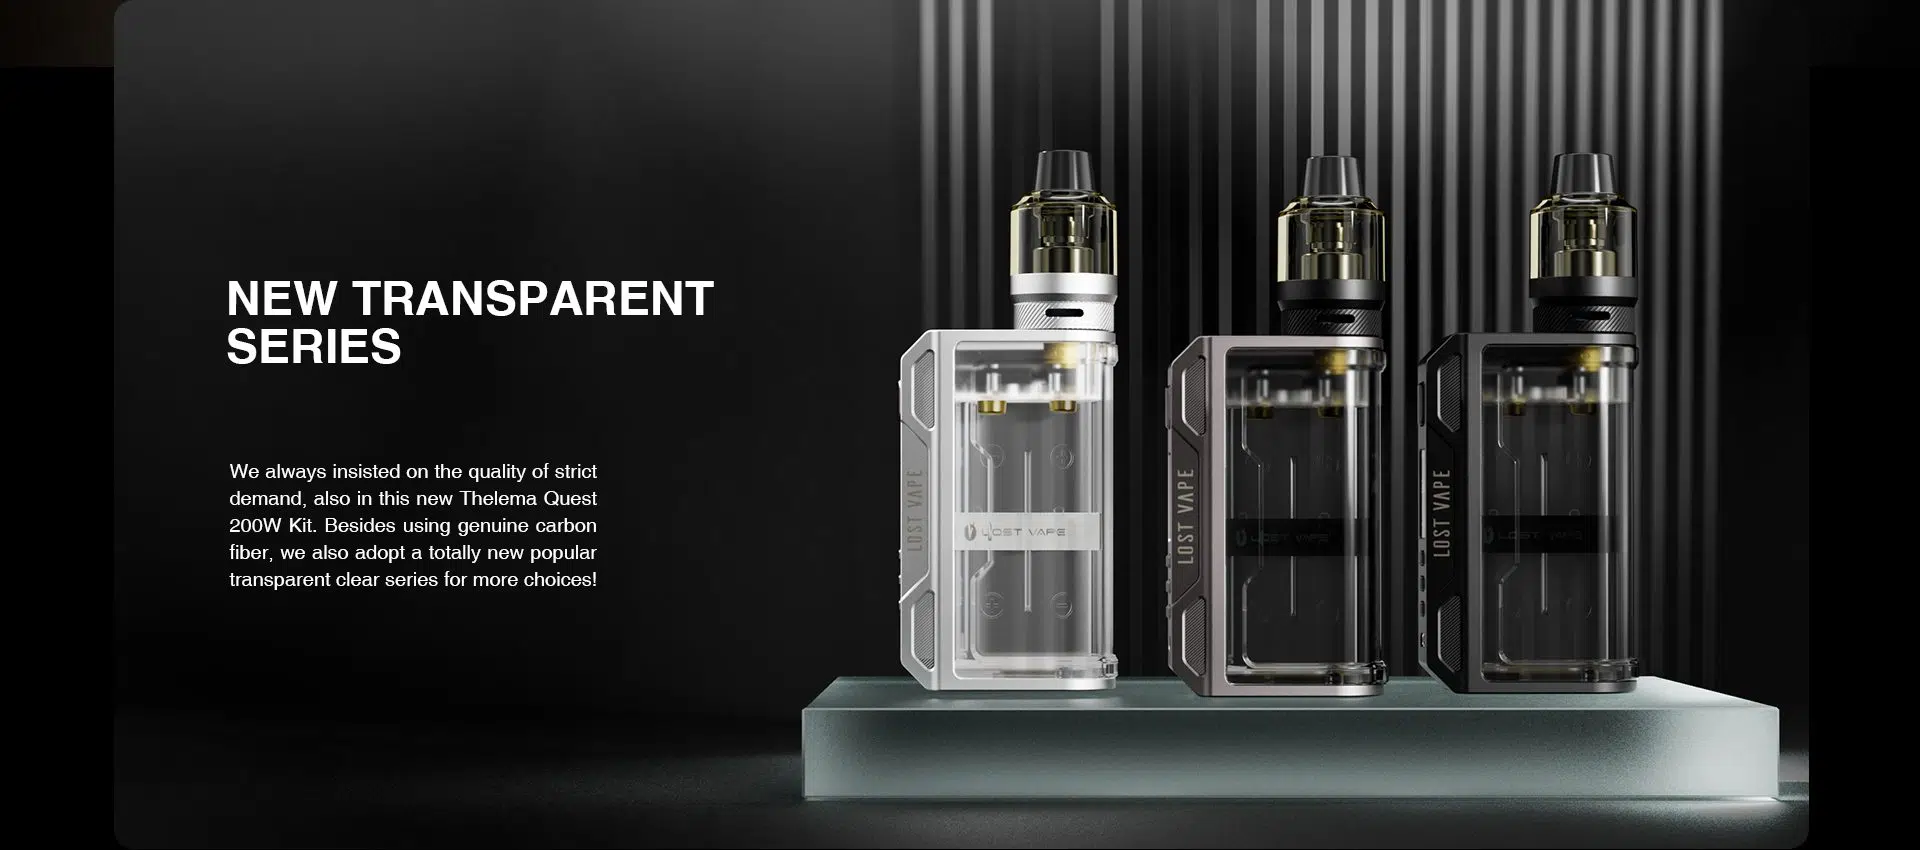 LOST VAPE THELEMA QUEST 200W KIT (15)